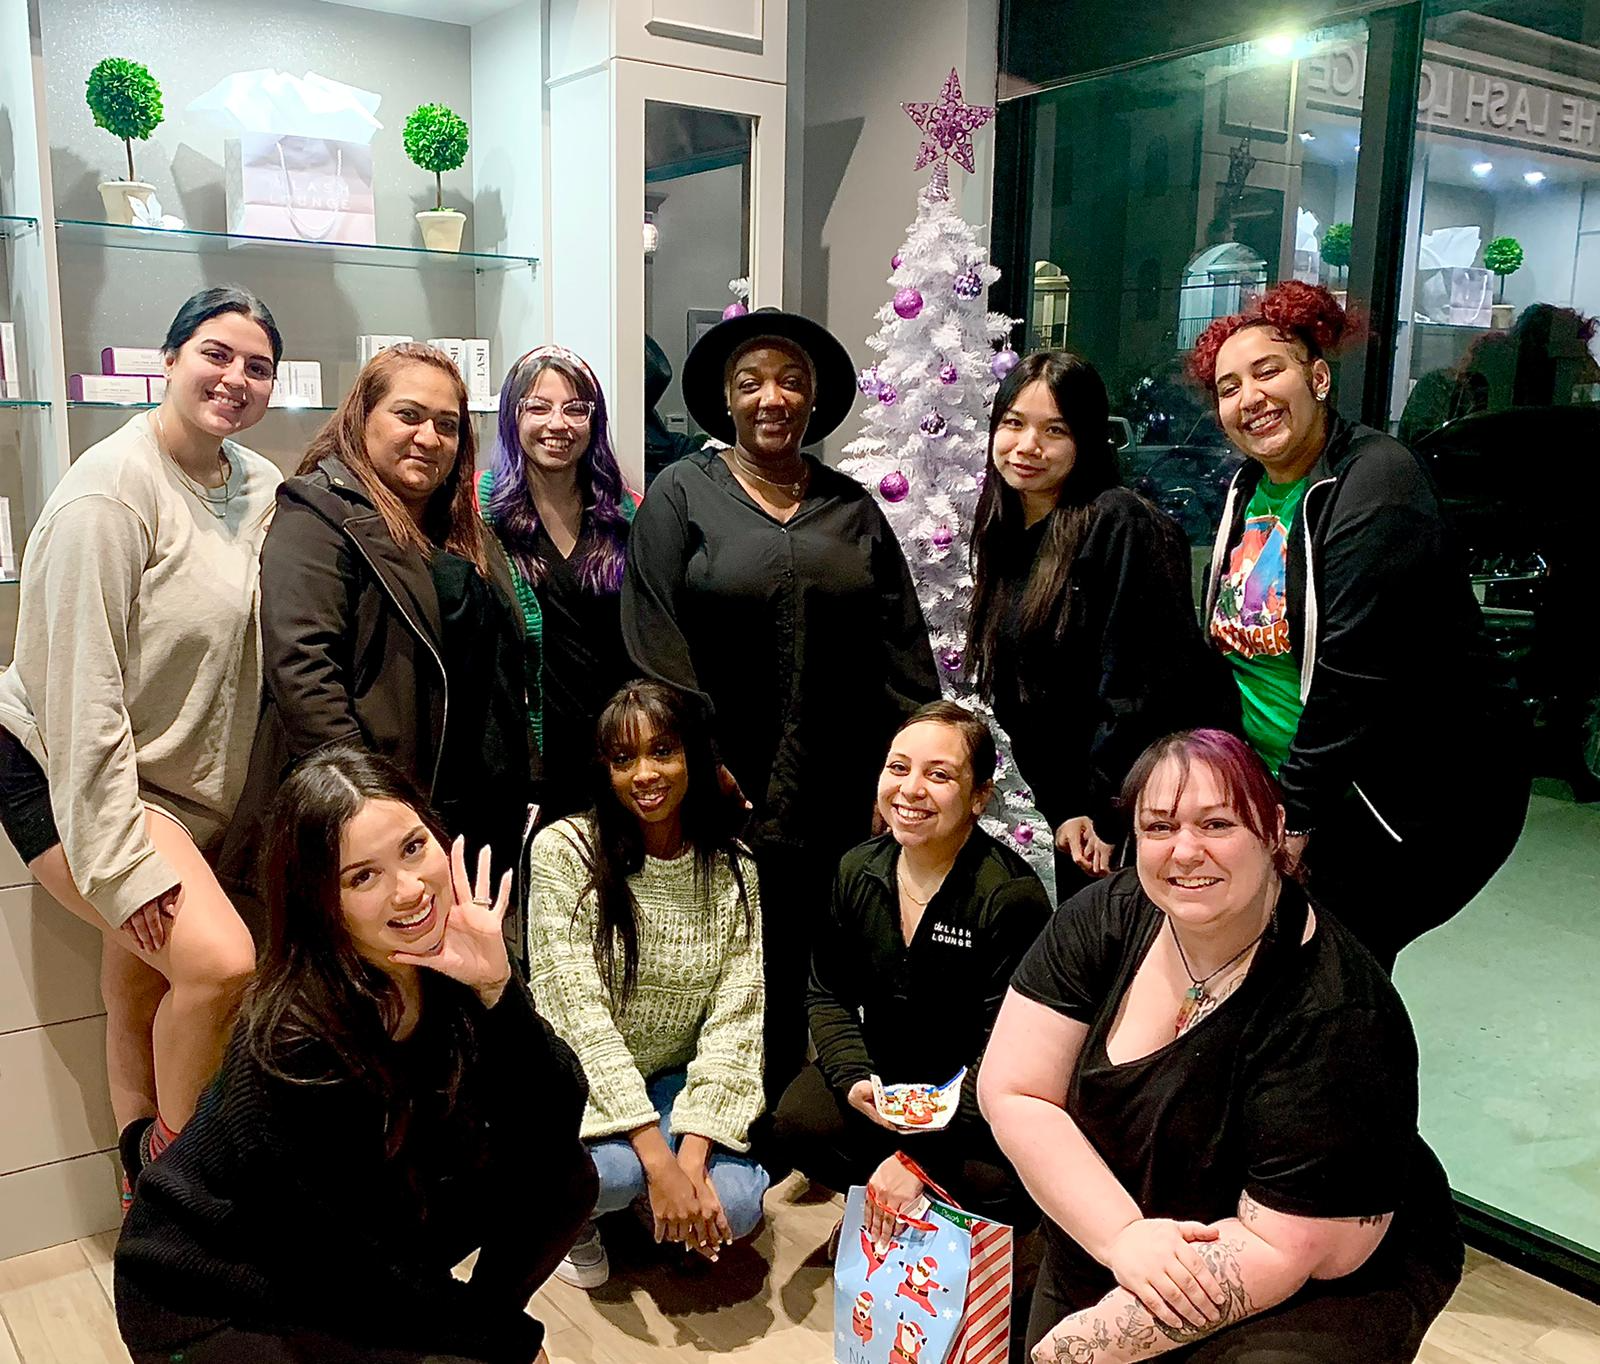 Salon team in lobby in front of Christmas tree